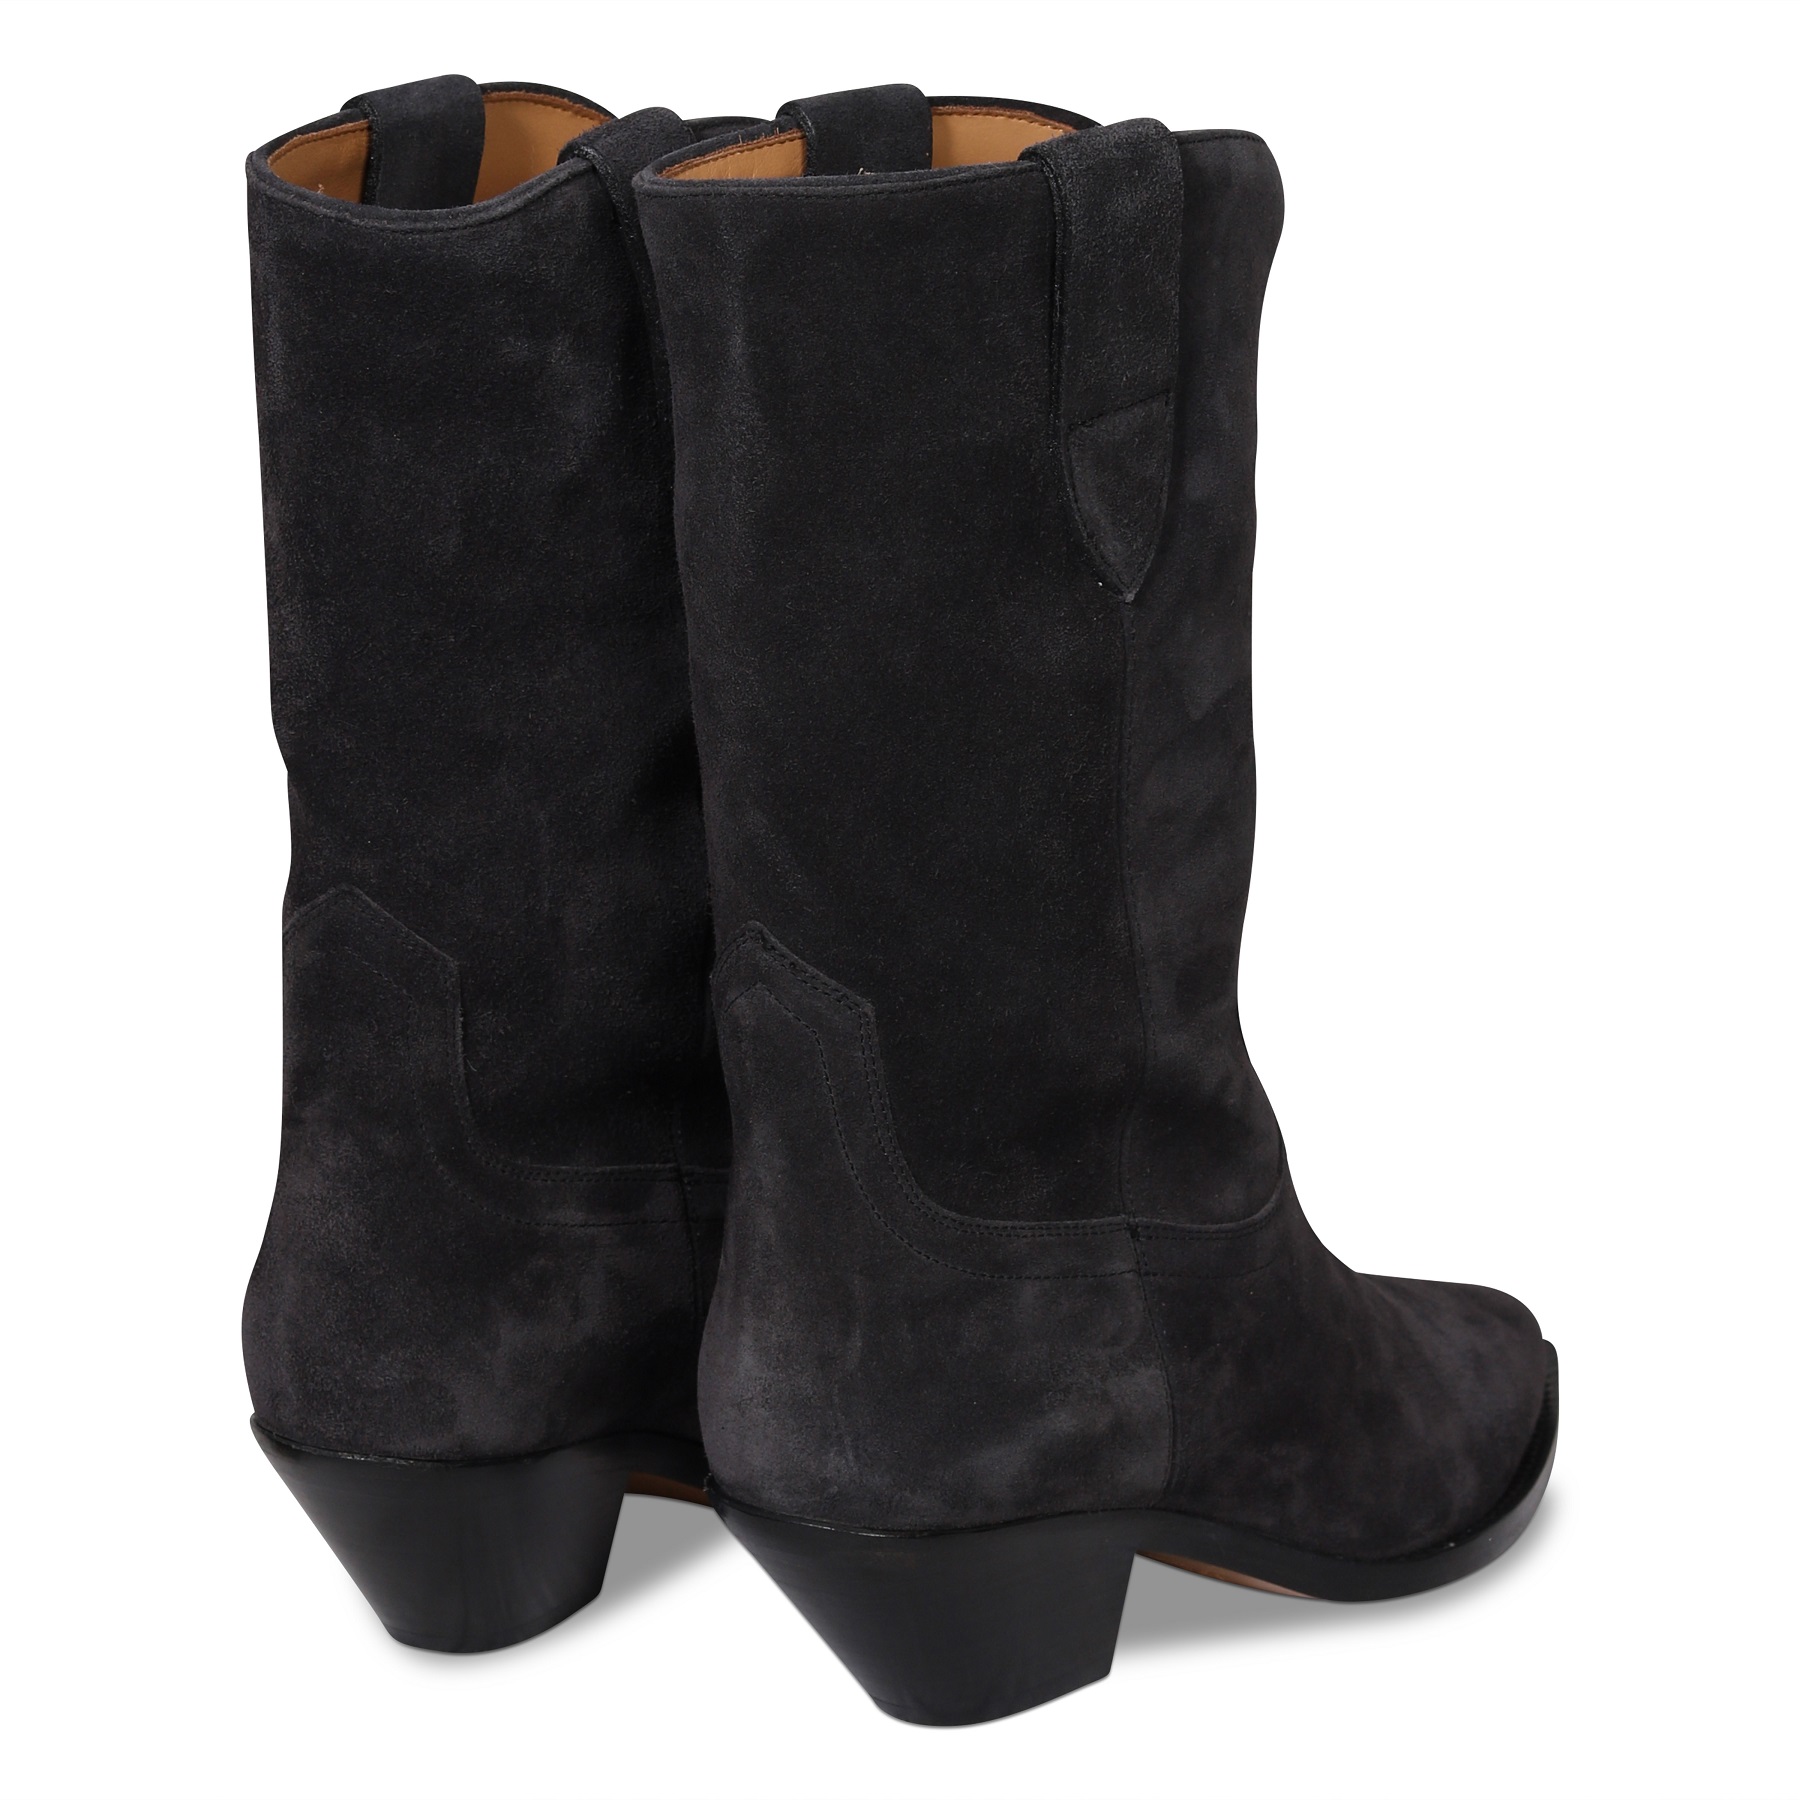 ISABEL MARANT Dahope Boots in Faded Black 37